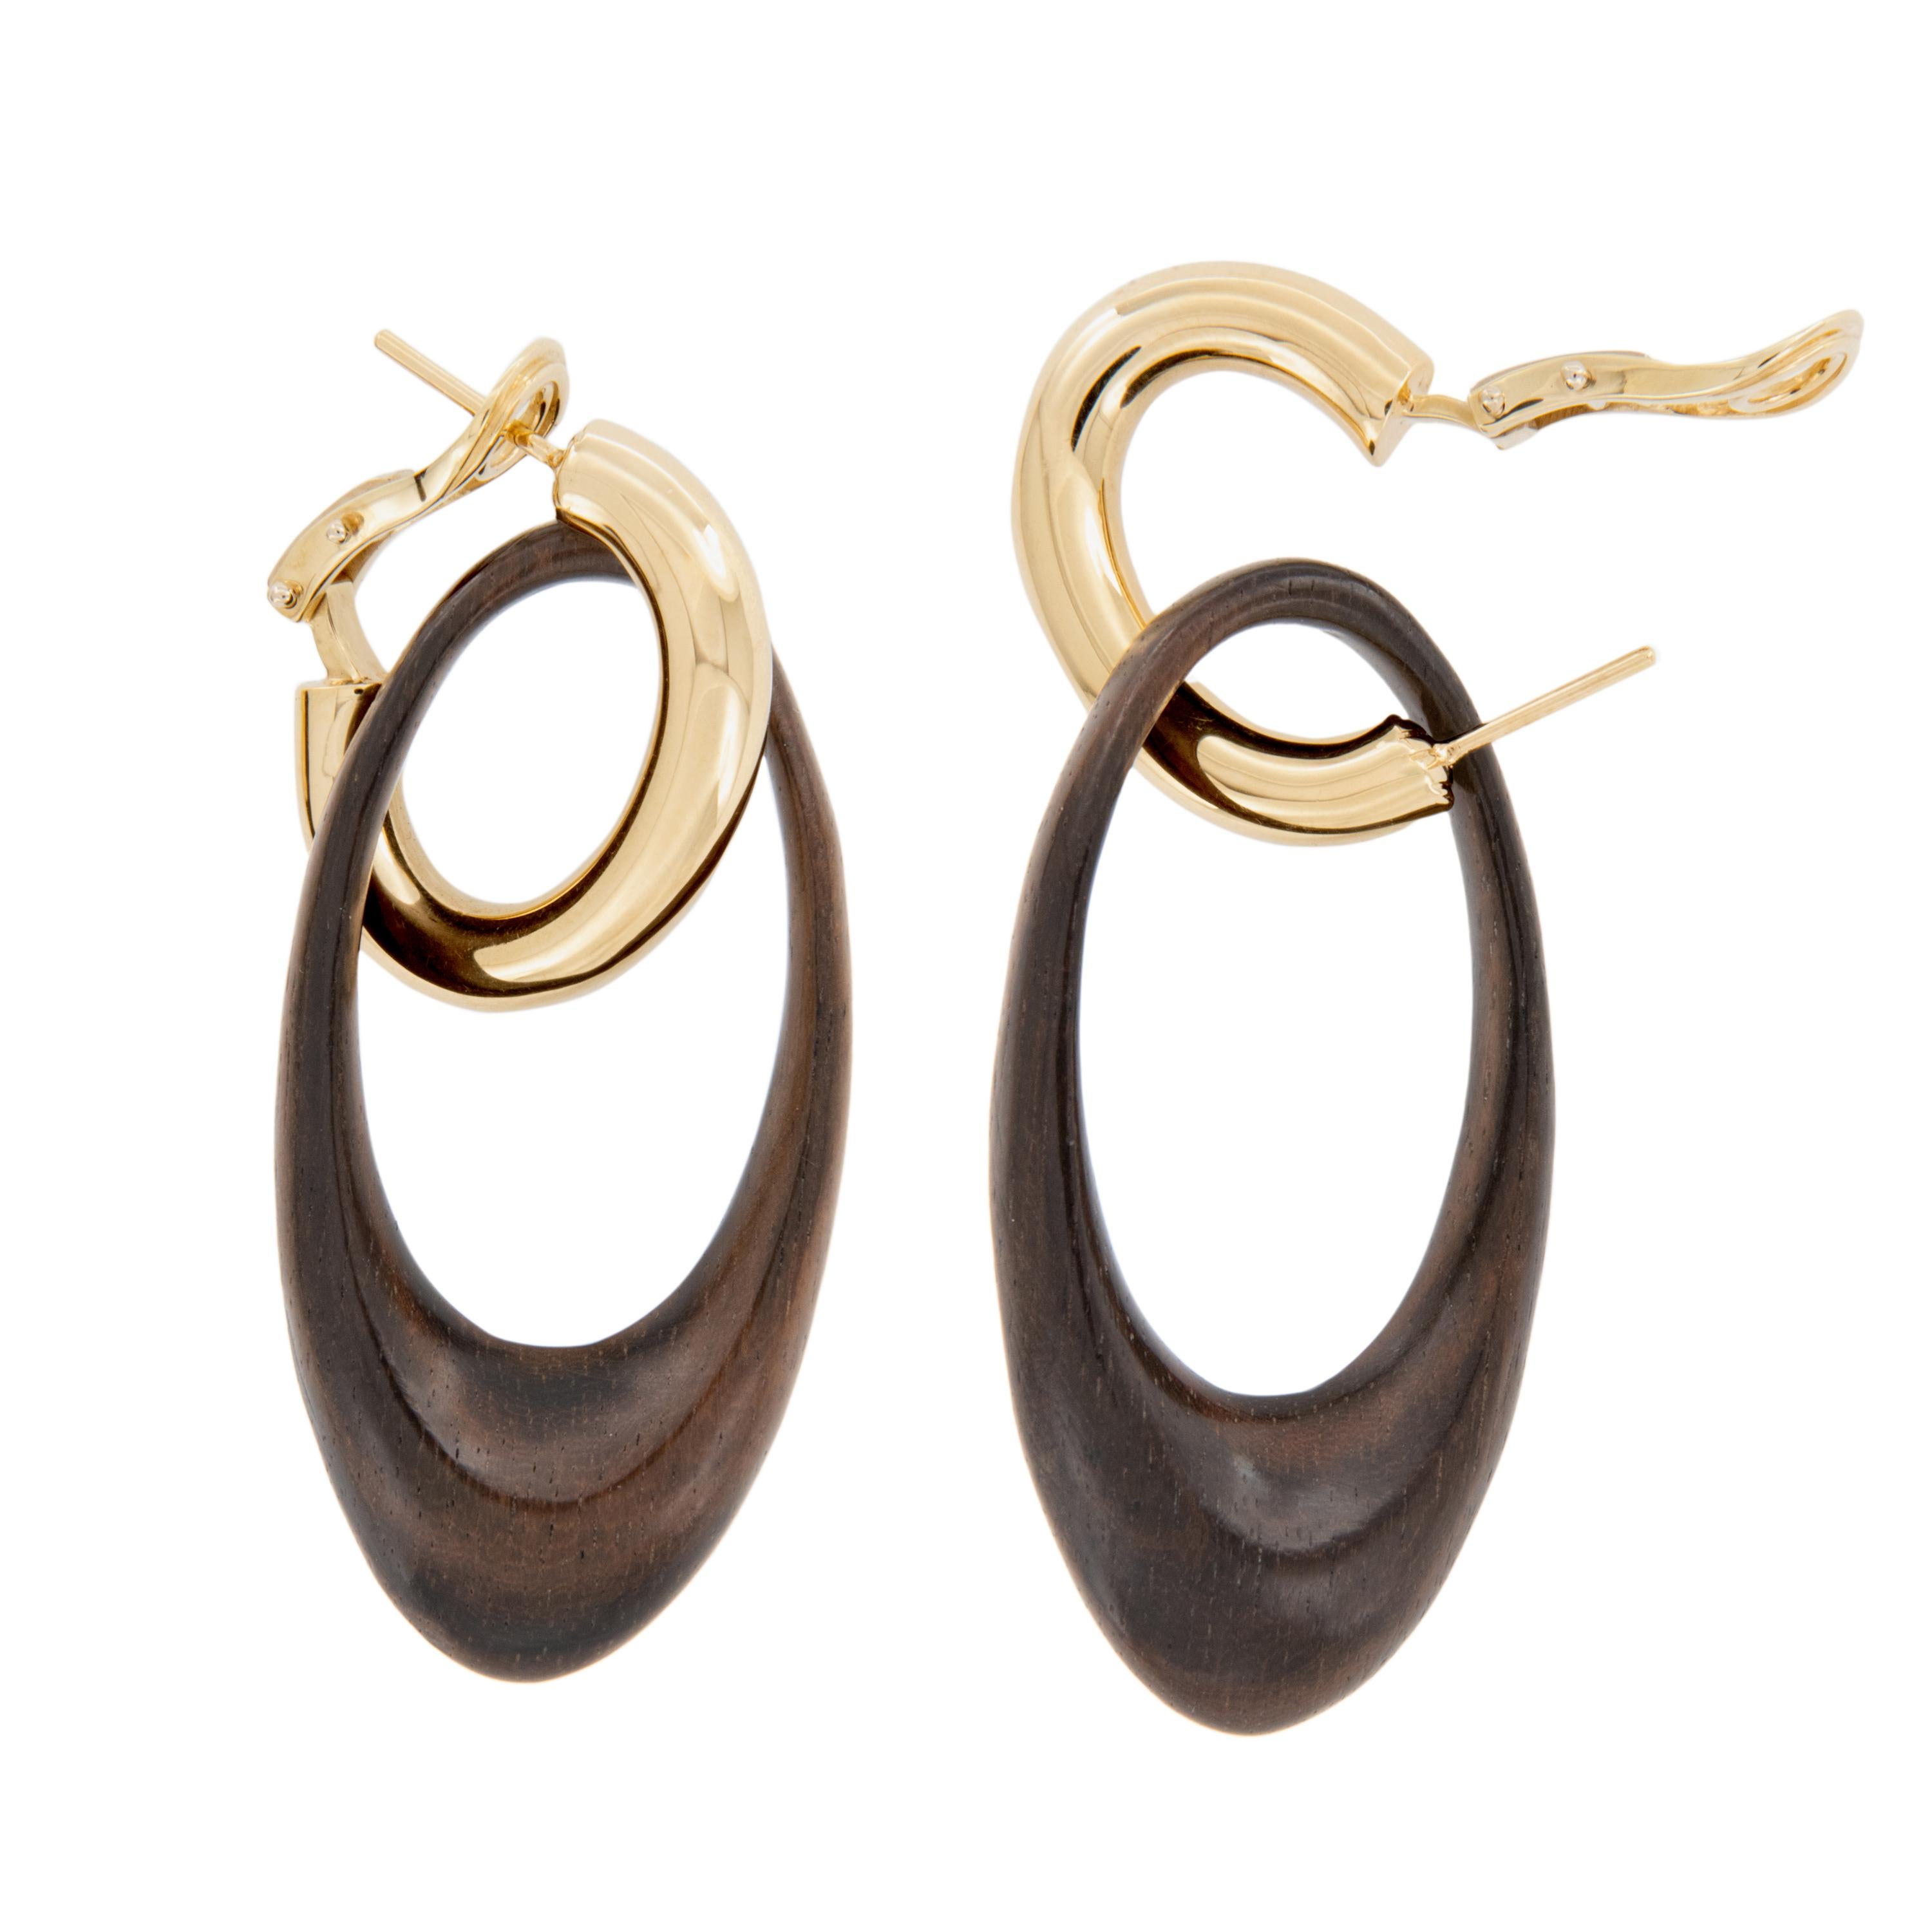 Classic Italian design using fine 18 karat yellow gold & rosewood. All rosewoods are strong and heavy, taking an excellent polish, being suitable for objects of fine art & fine guitars. These door knocker earrings will 